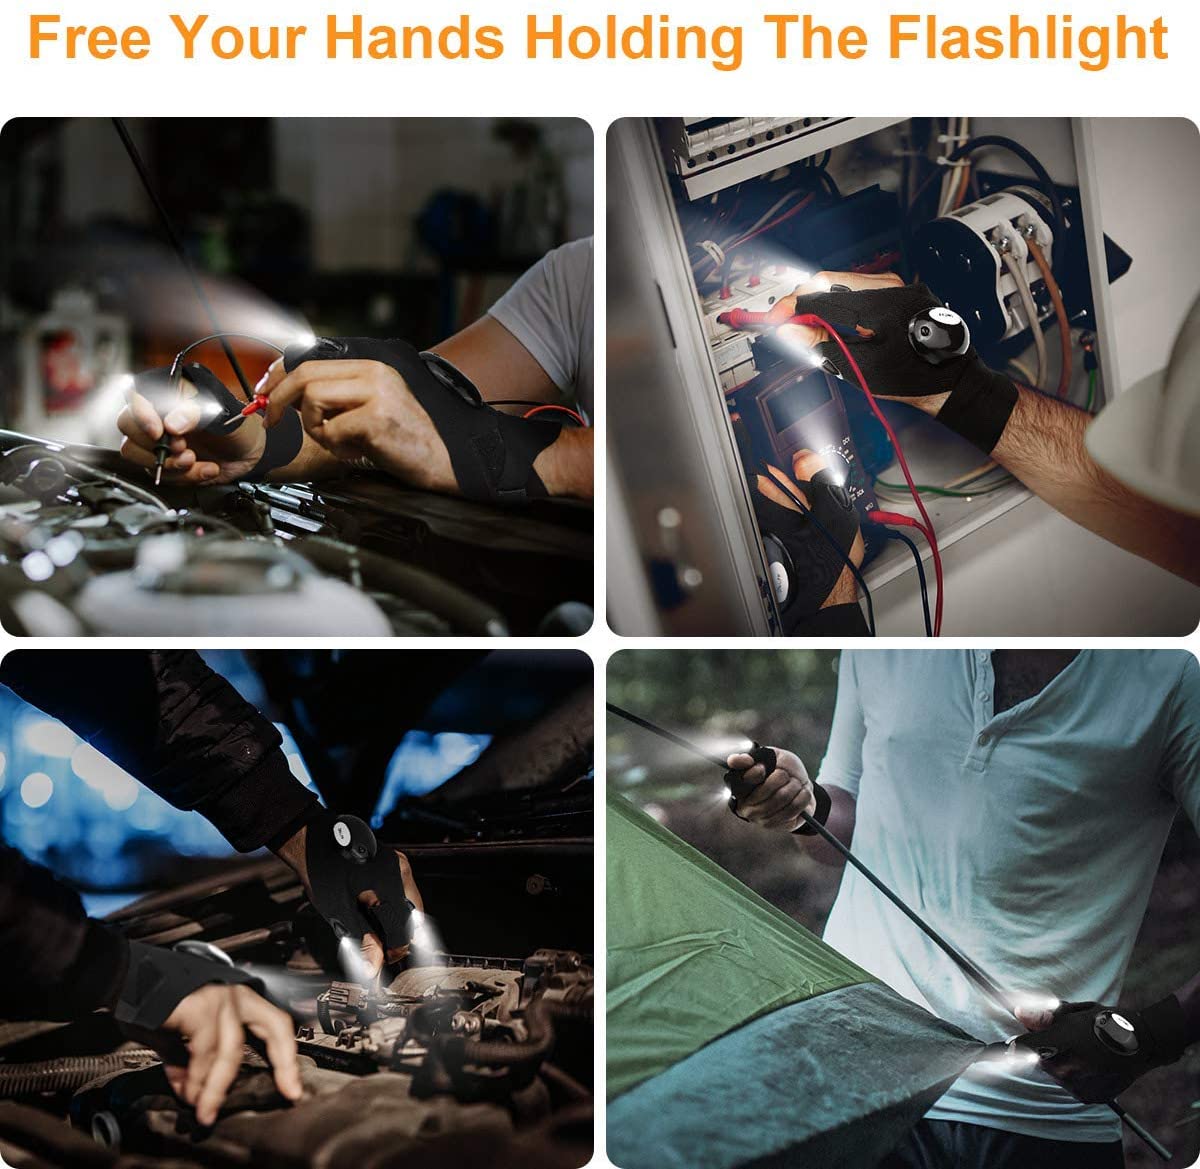 LED Flashlight Gloves, Gifts for Men Dad Husband Boyfriend, Hands Free Light Gadgets Tools for Night Fishing, Running, Camping, Car Repairing, Father's Day Gifts for Dad